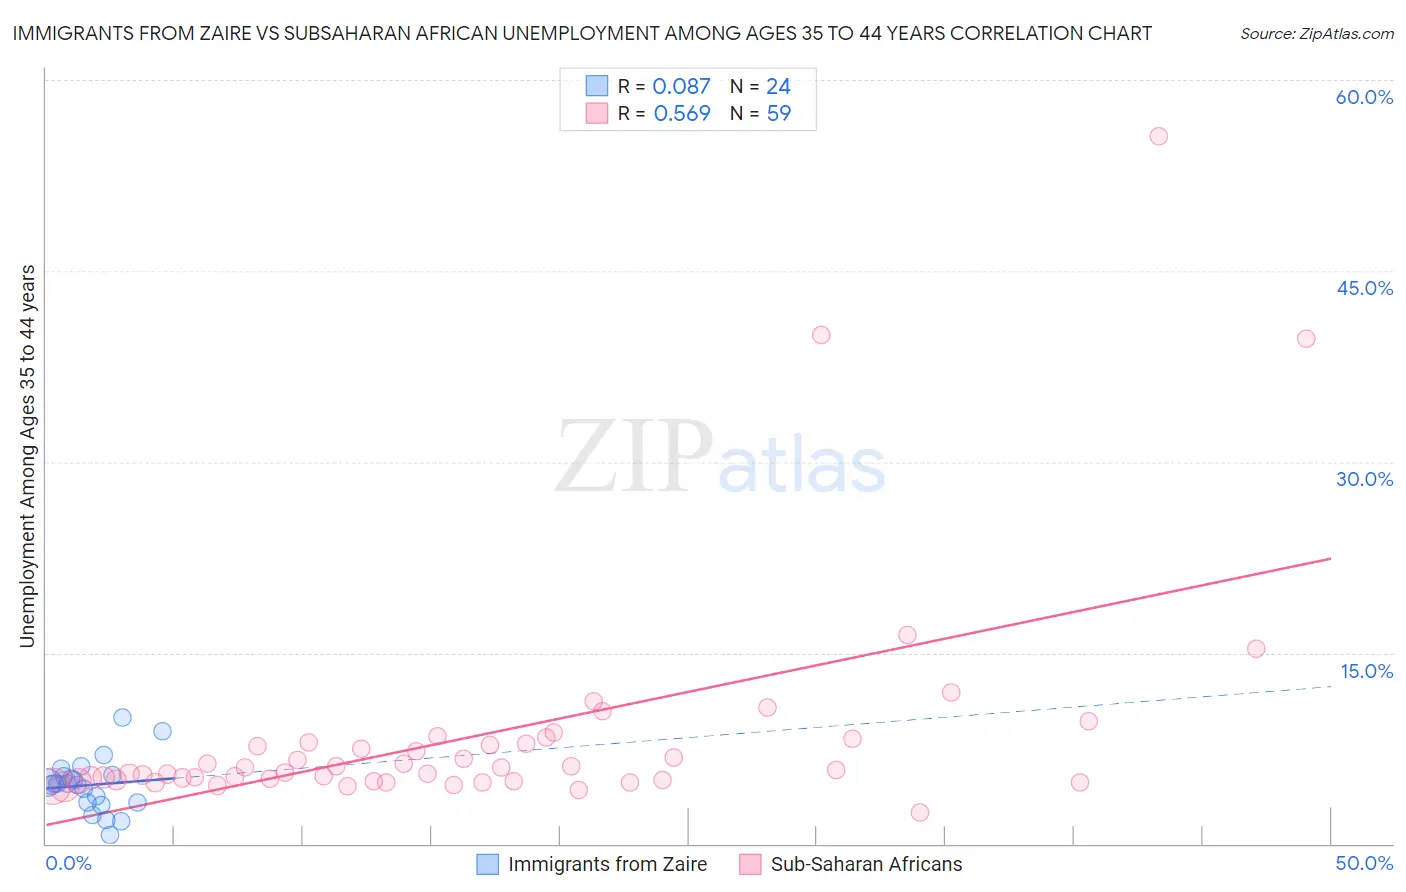 Immigrants from Zaire vs Subsaharan African Unemployment Among Ages 35 to 44 years